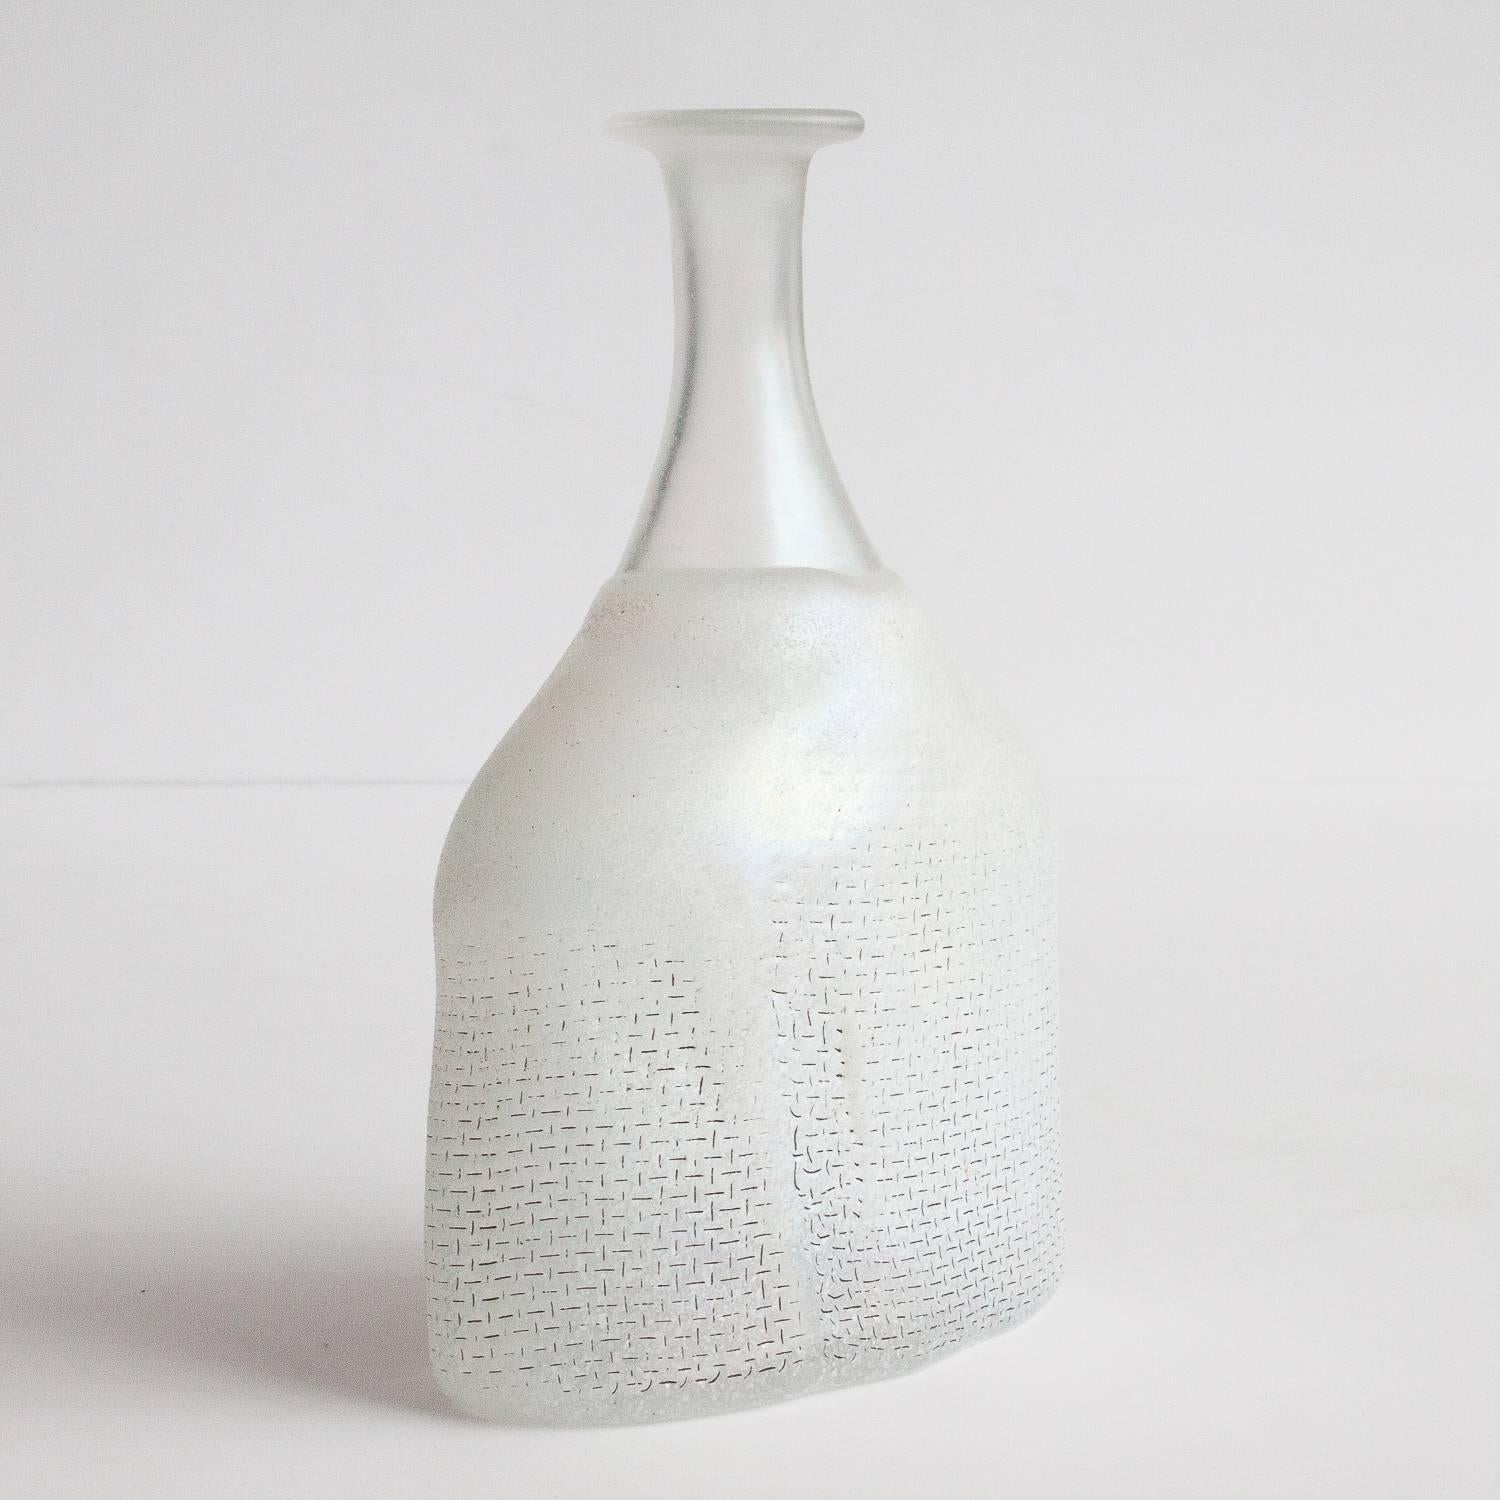 Bertil Vallien vase / bottle in the series Network for Kosta Boda. Designed in 1979. The design is called Network and is handblown. The series got its ruff net pattern when the glass is blown into a mould lined by steel mesh. The glass is white /